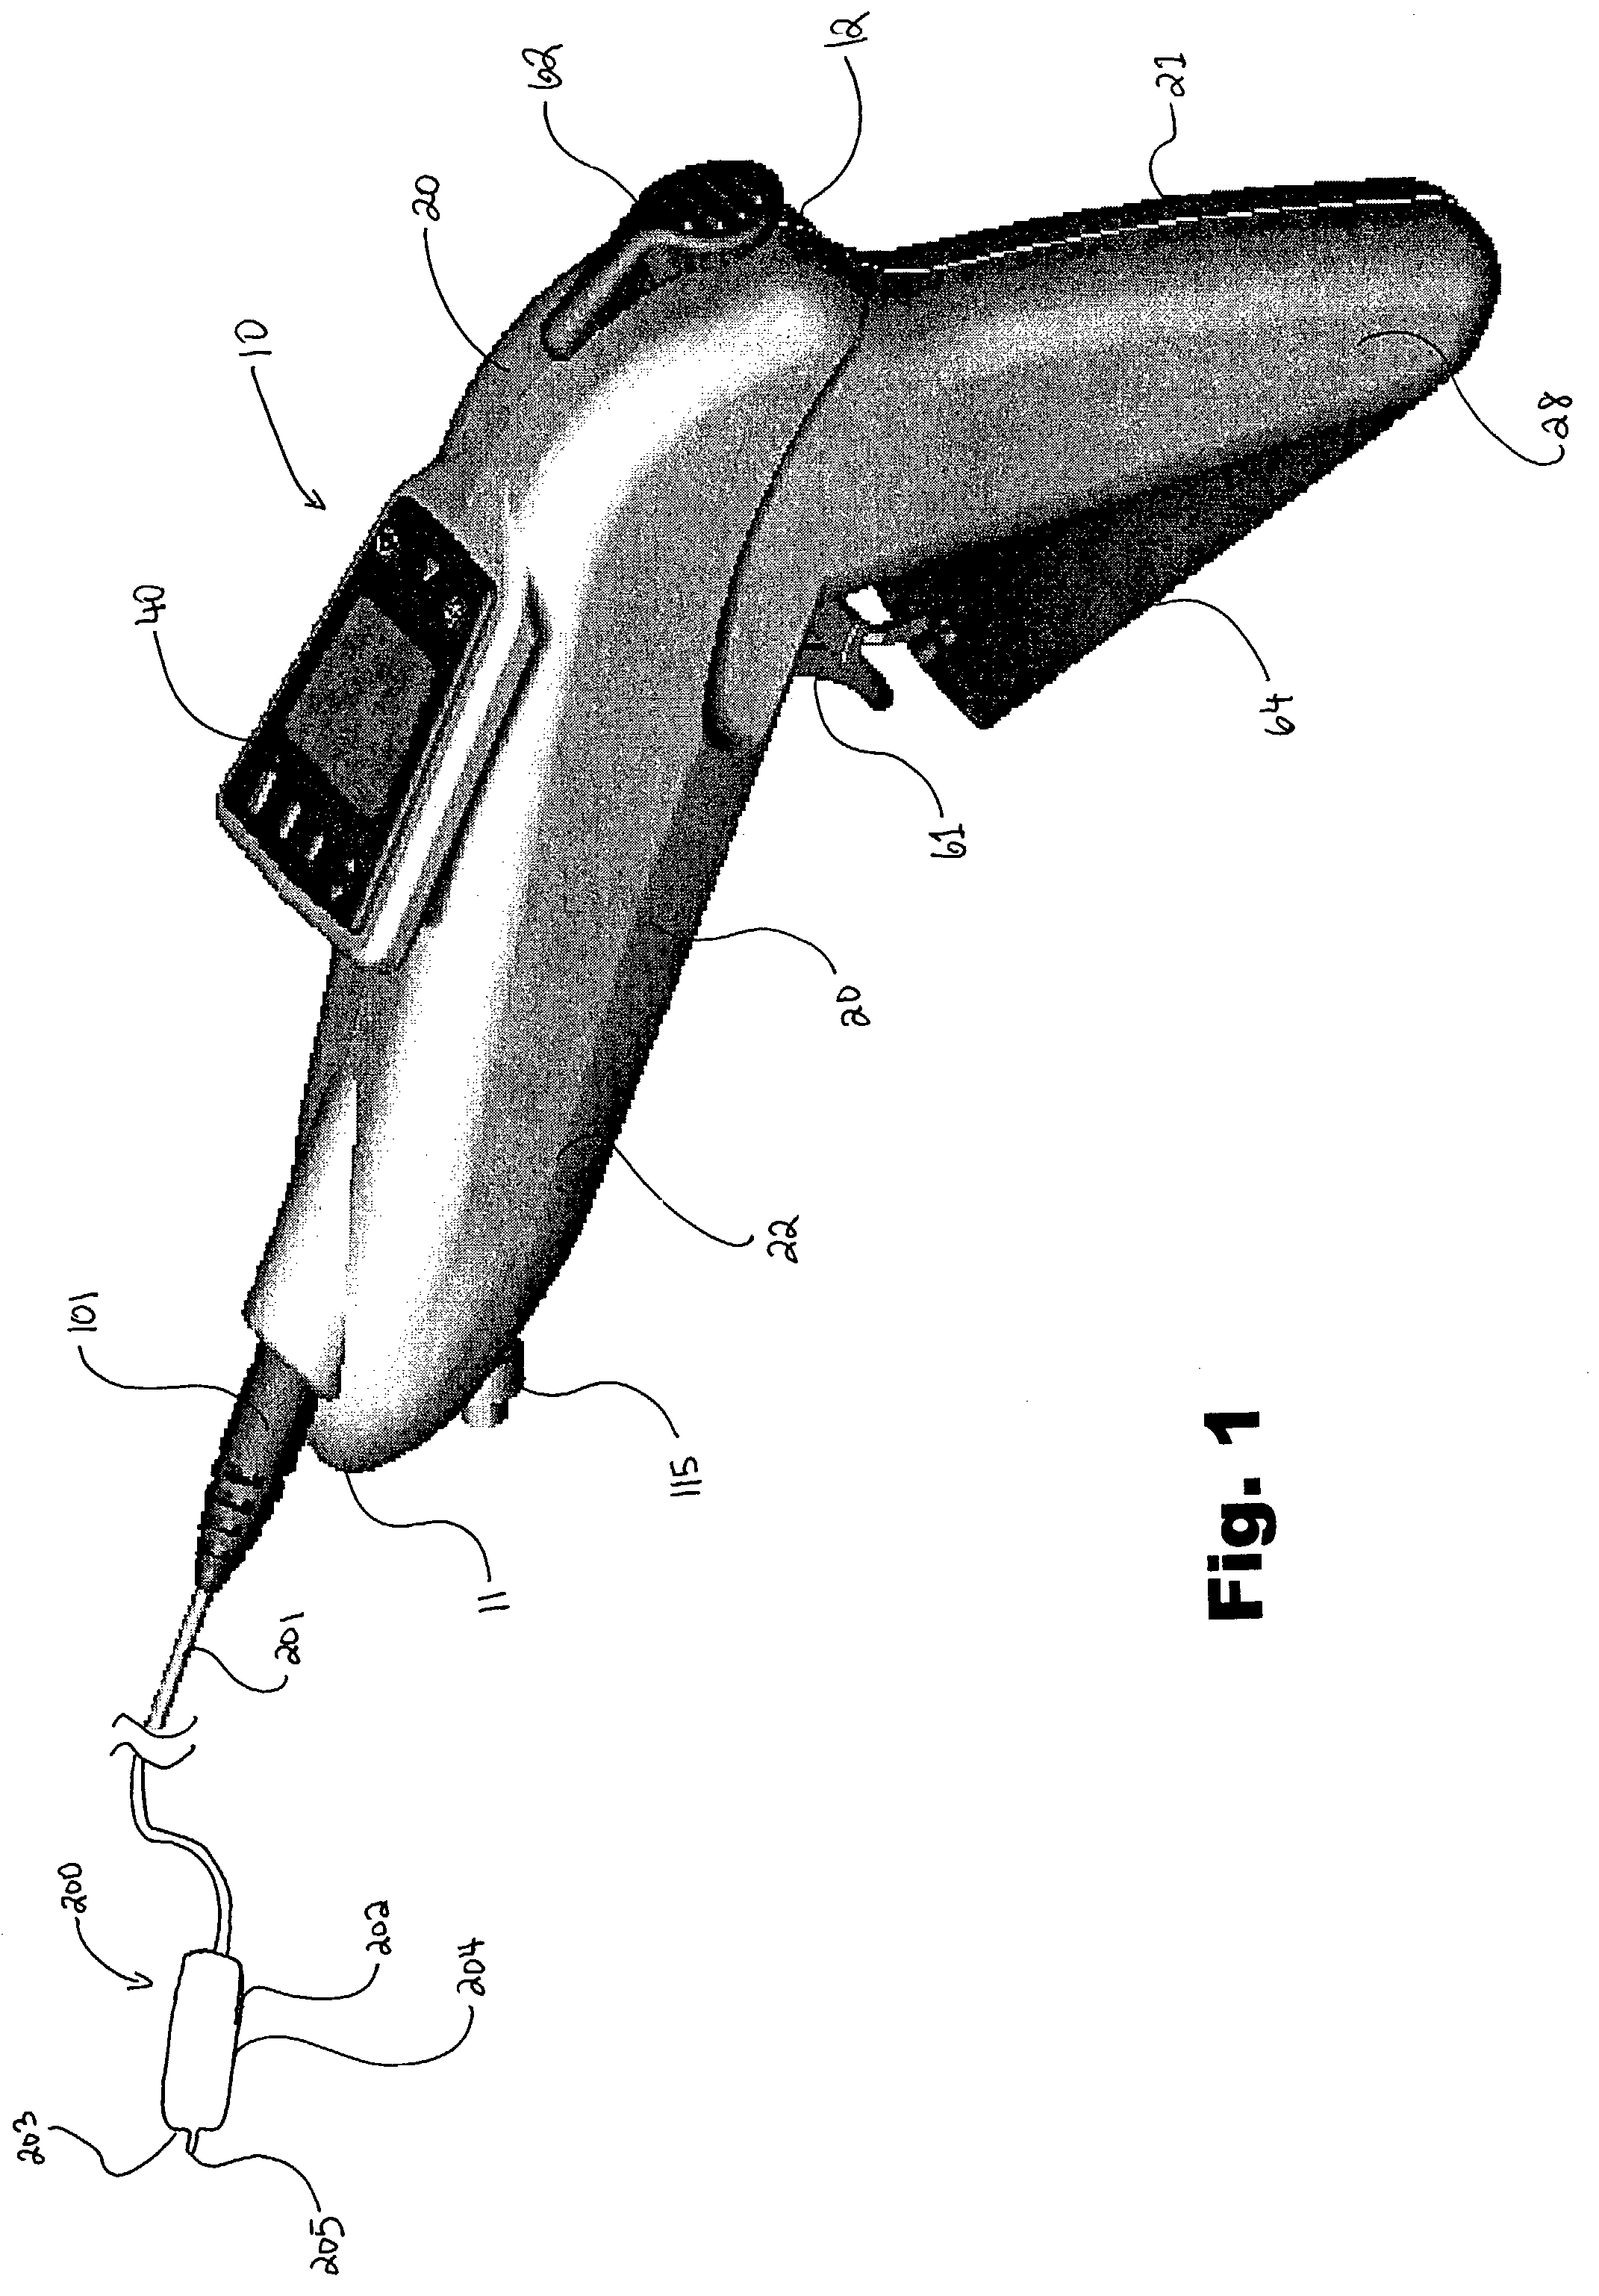 Fluid delivery system and related methods of use